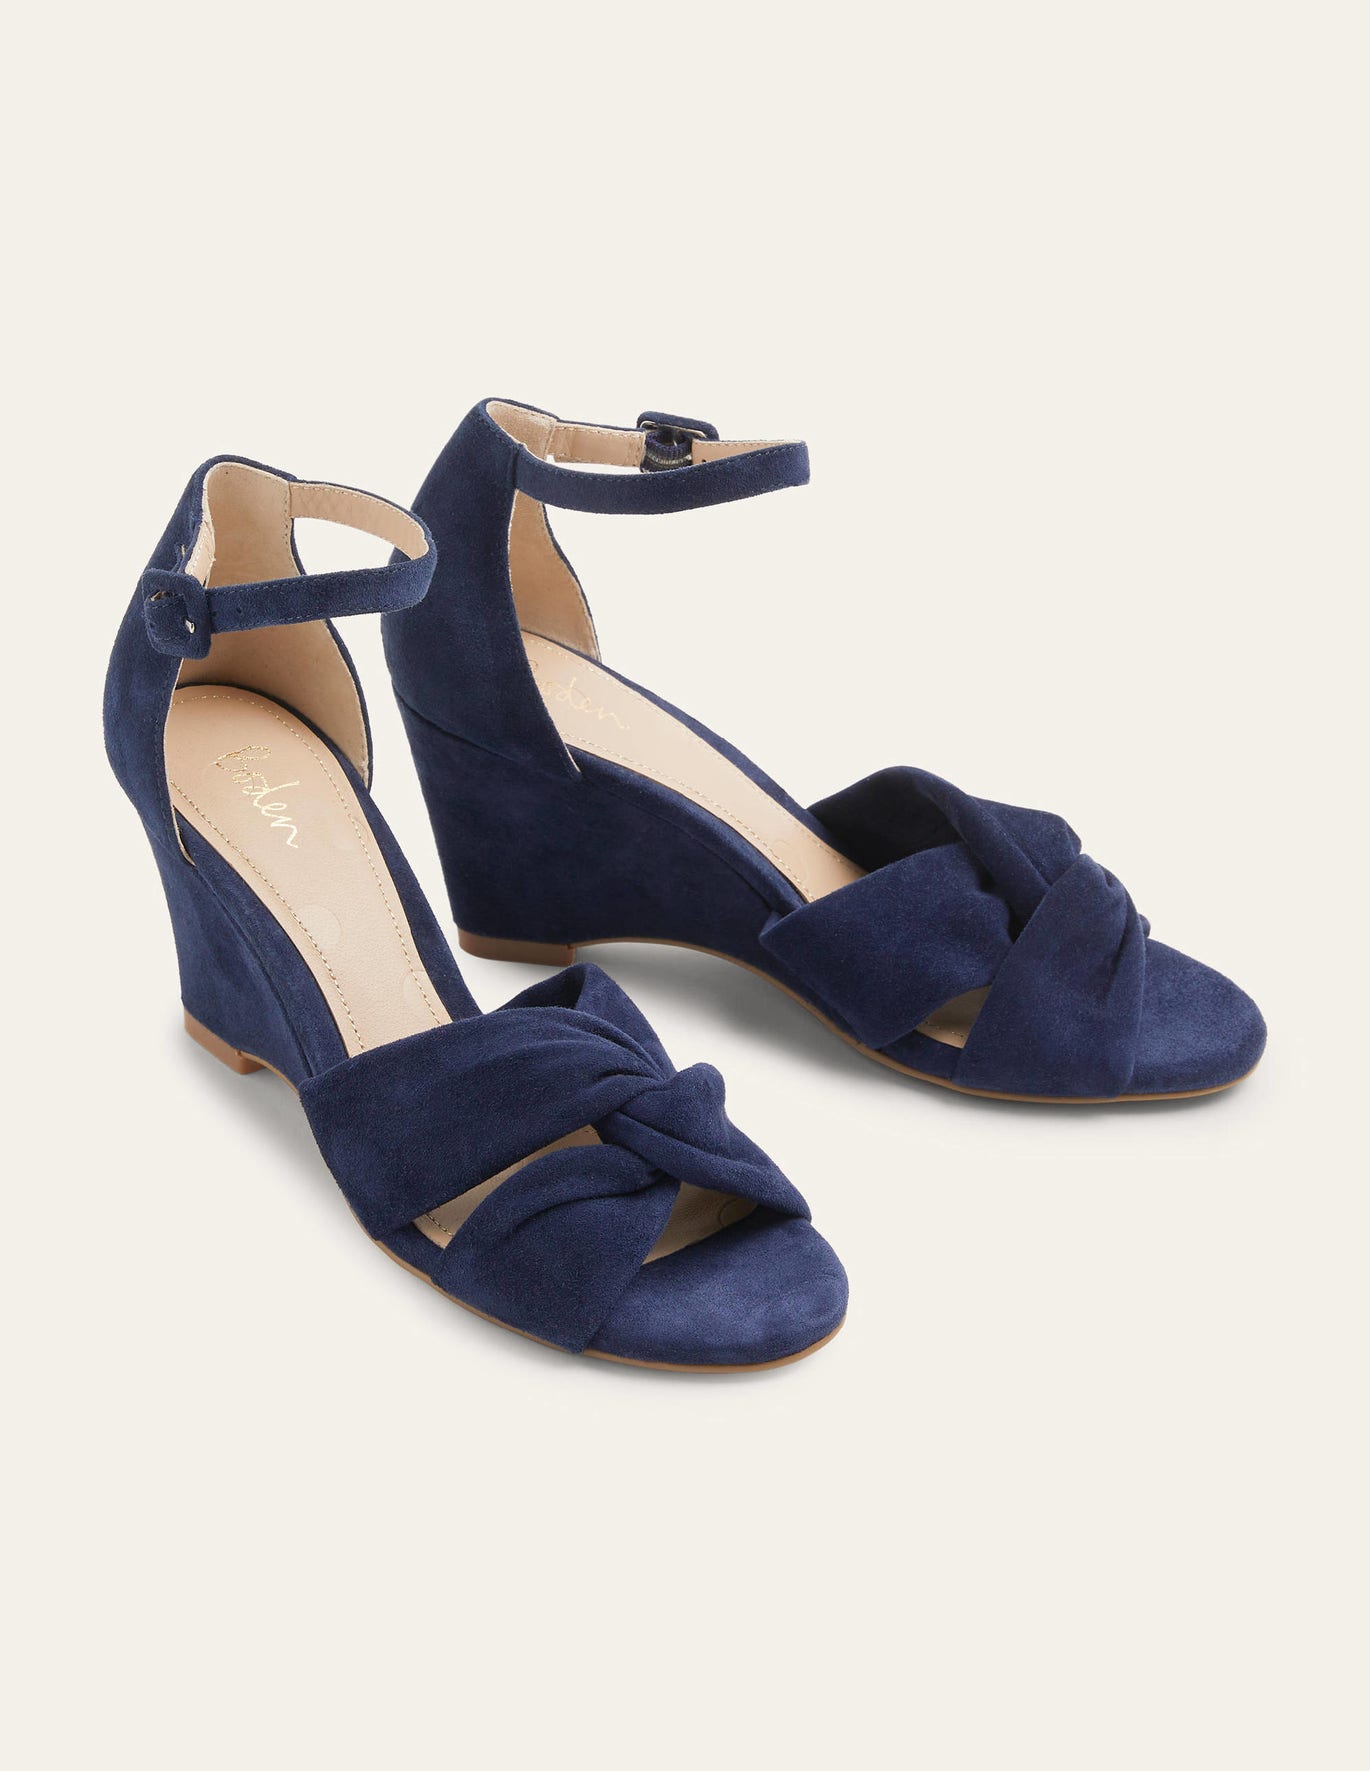 Boden Knot Front Wedge Sandal - Navy